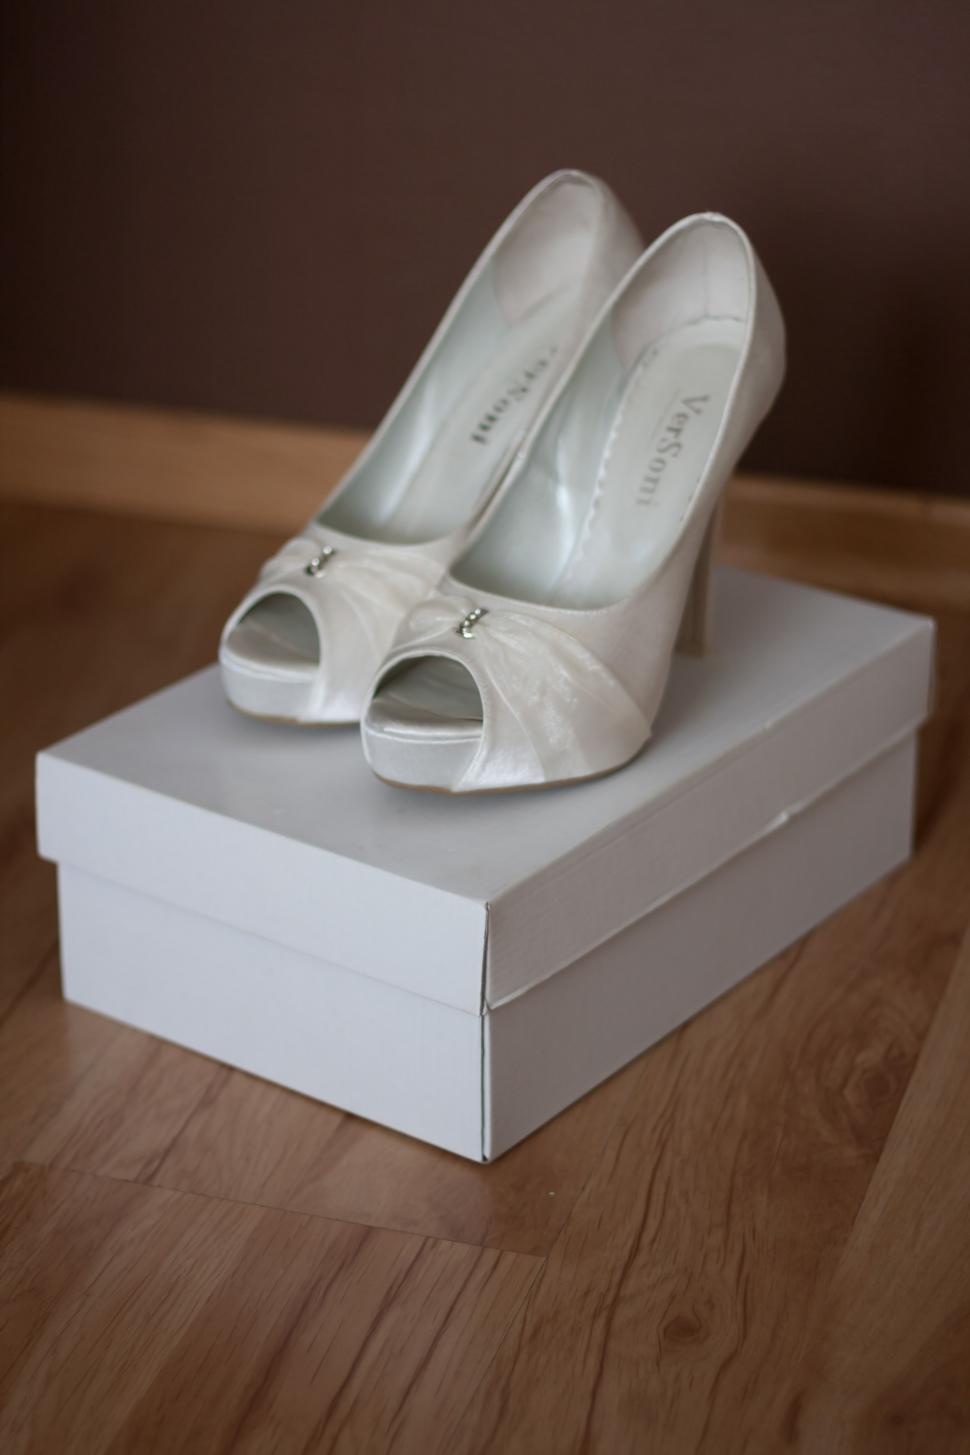 Free Image of White High Heels on Top of a Box 